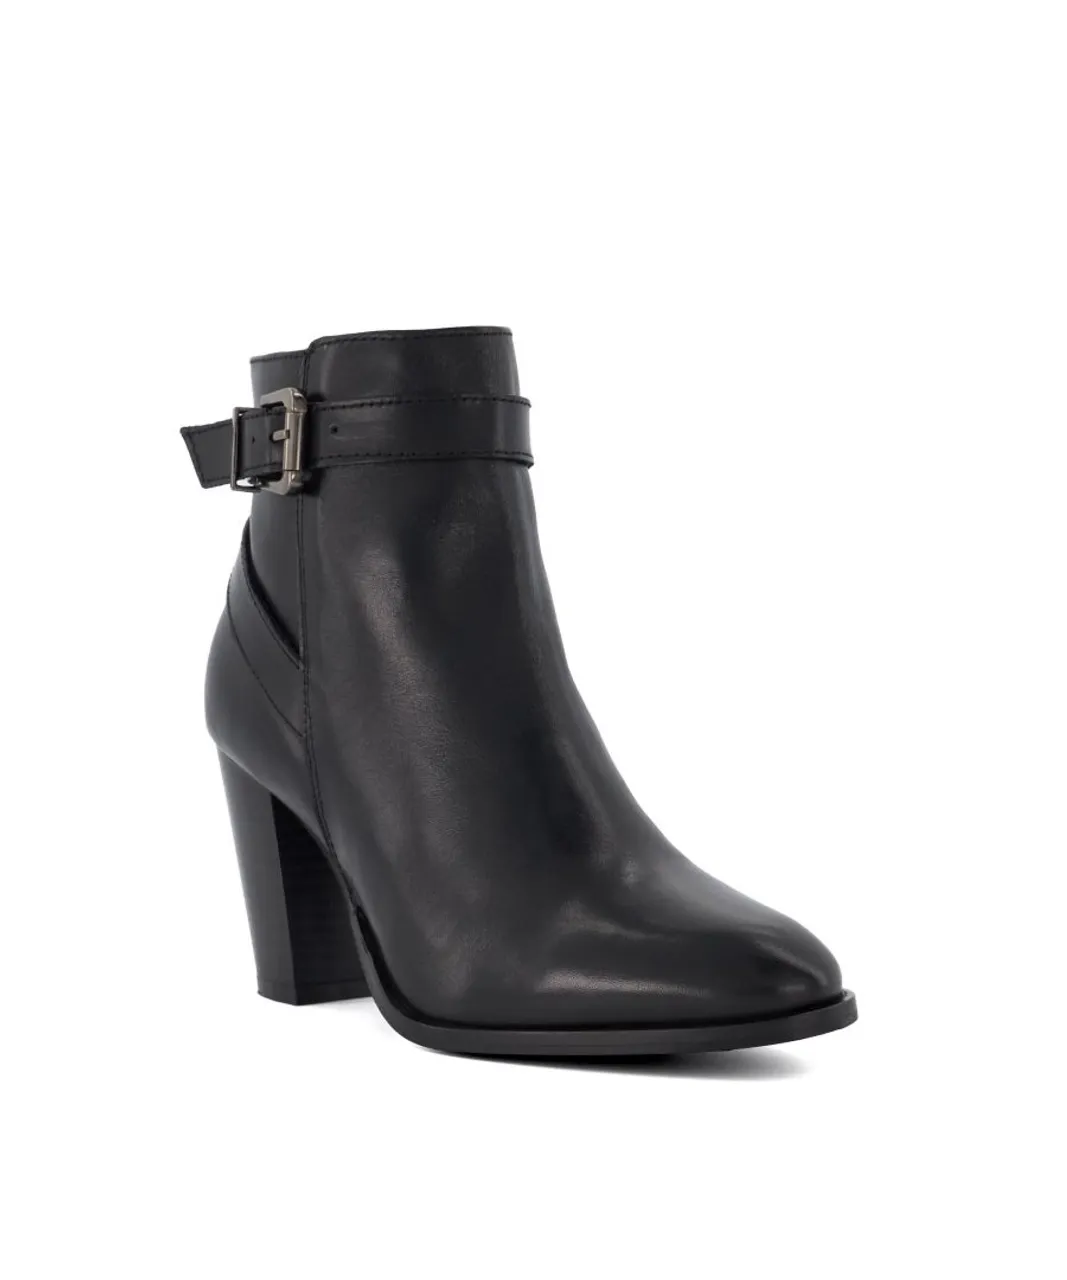 Dune London Womens Ladies Smart Boots - Philippa 2 - Black Leather (archived)